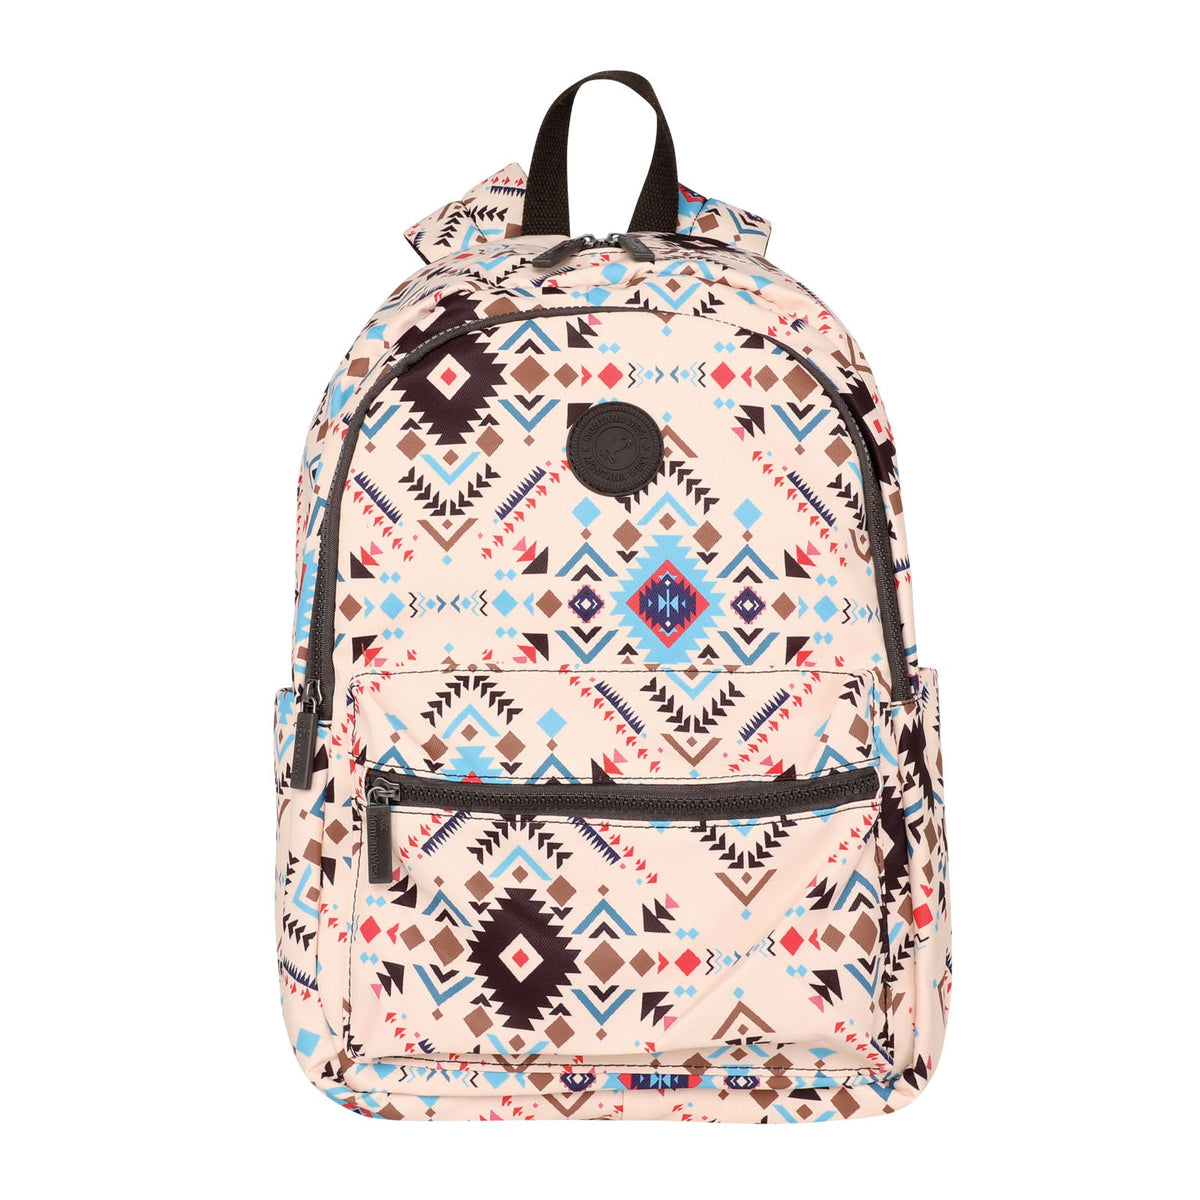 Montana West Aztec Print Backpack - Cowgirl Wear